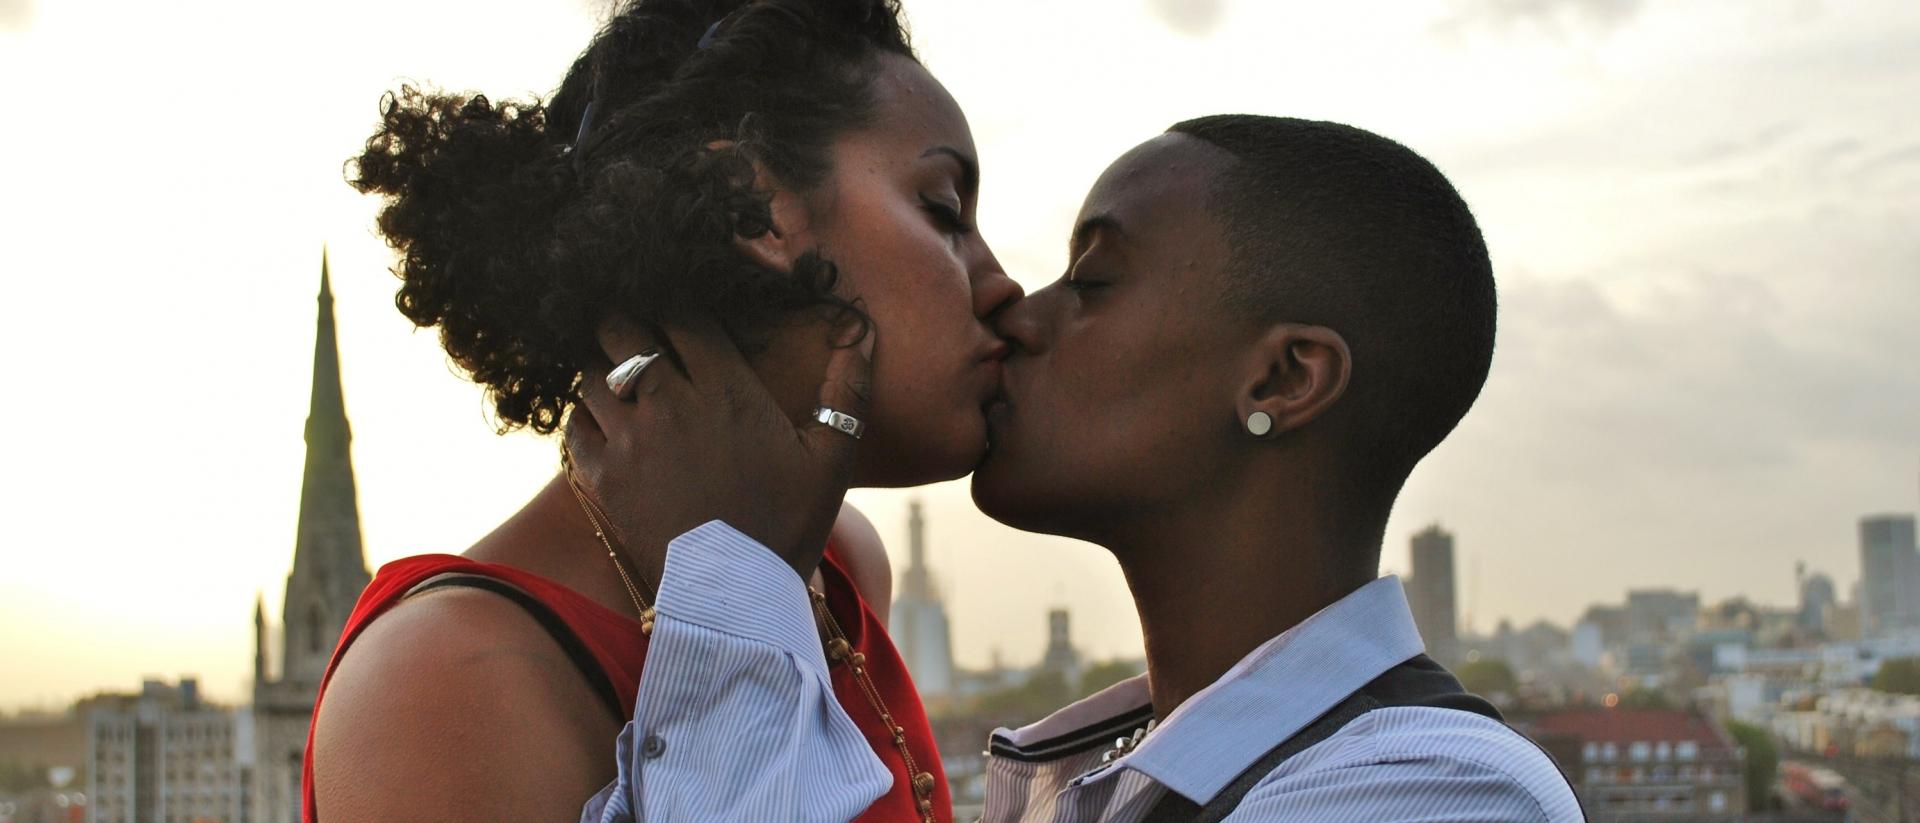 a still from queerama featuring two people kissing on a roof overlooking a city